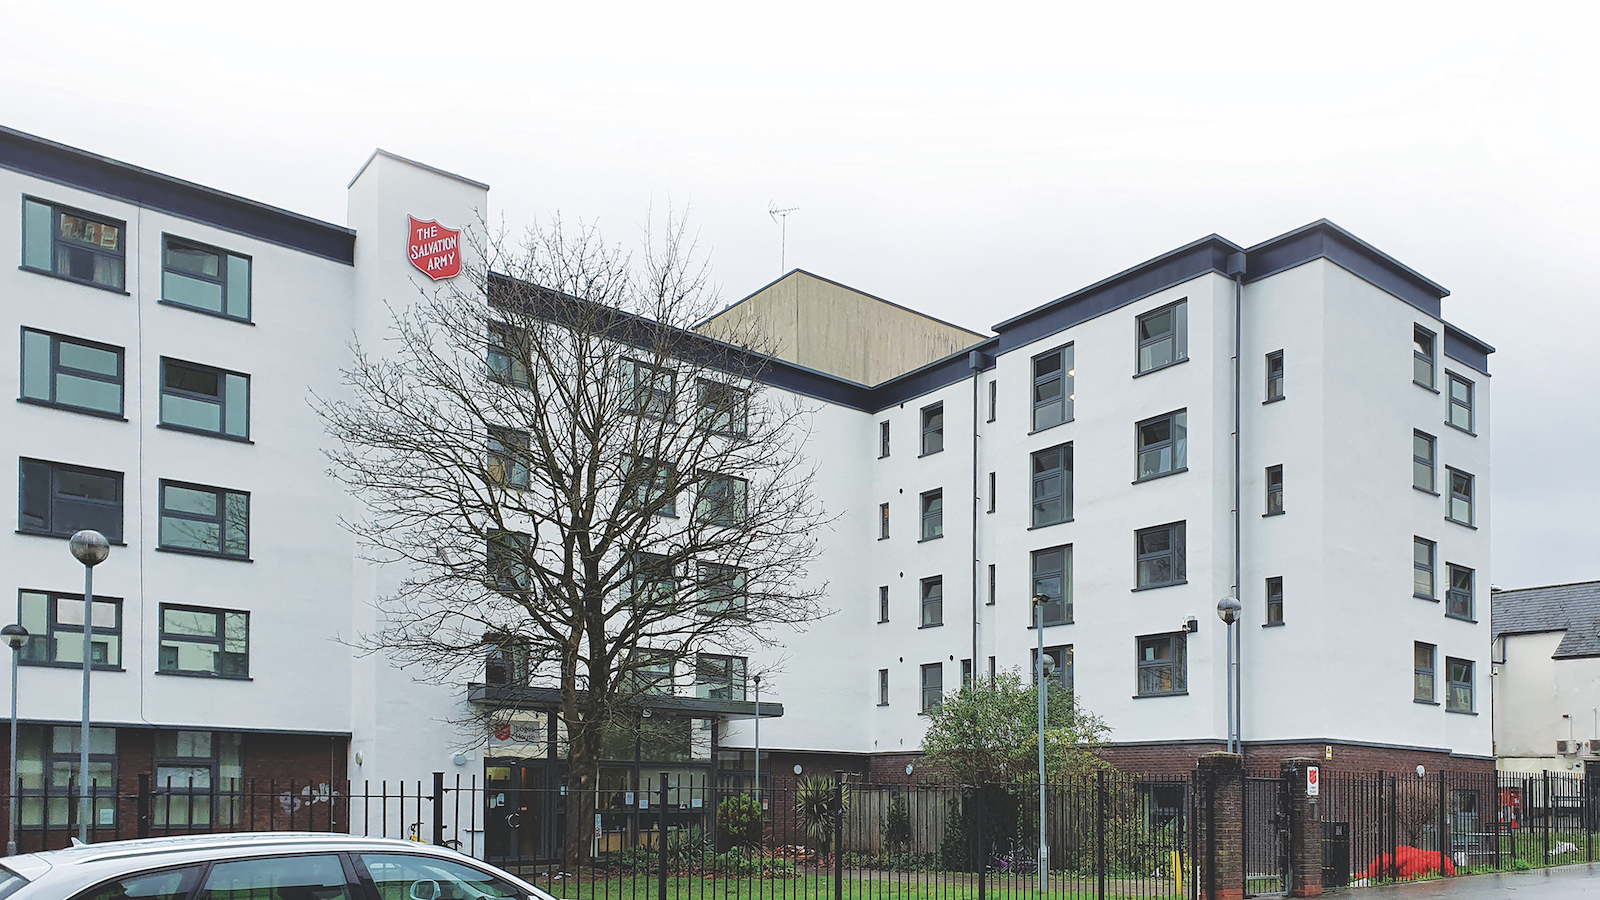 Salvation Army hostel for thehomeless in Bristol